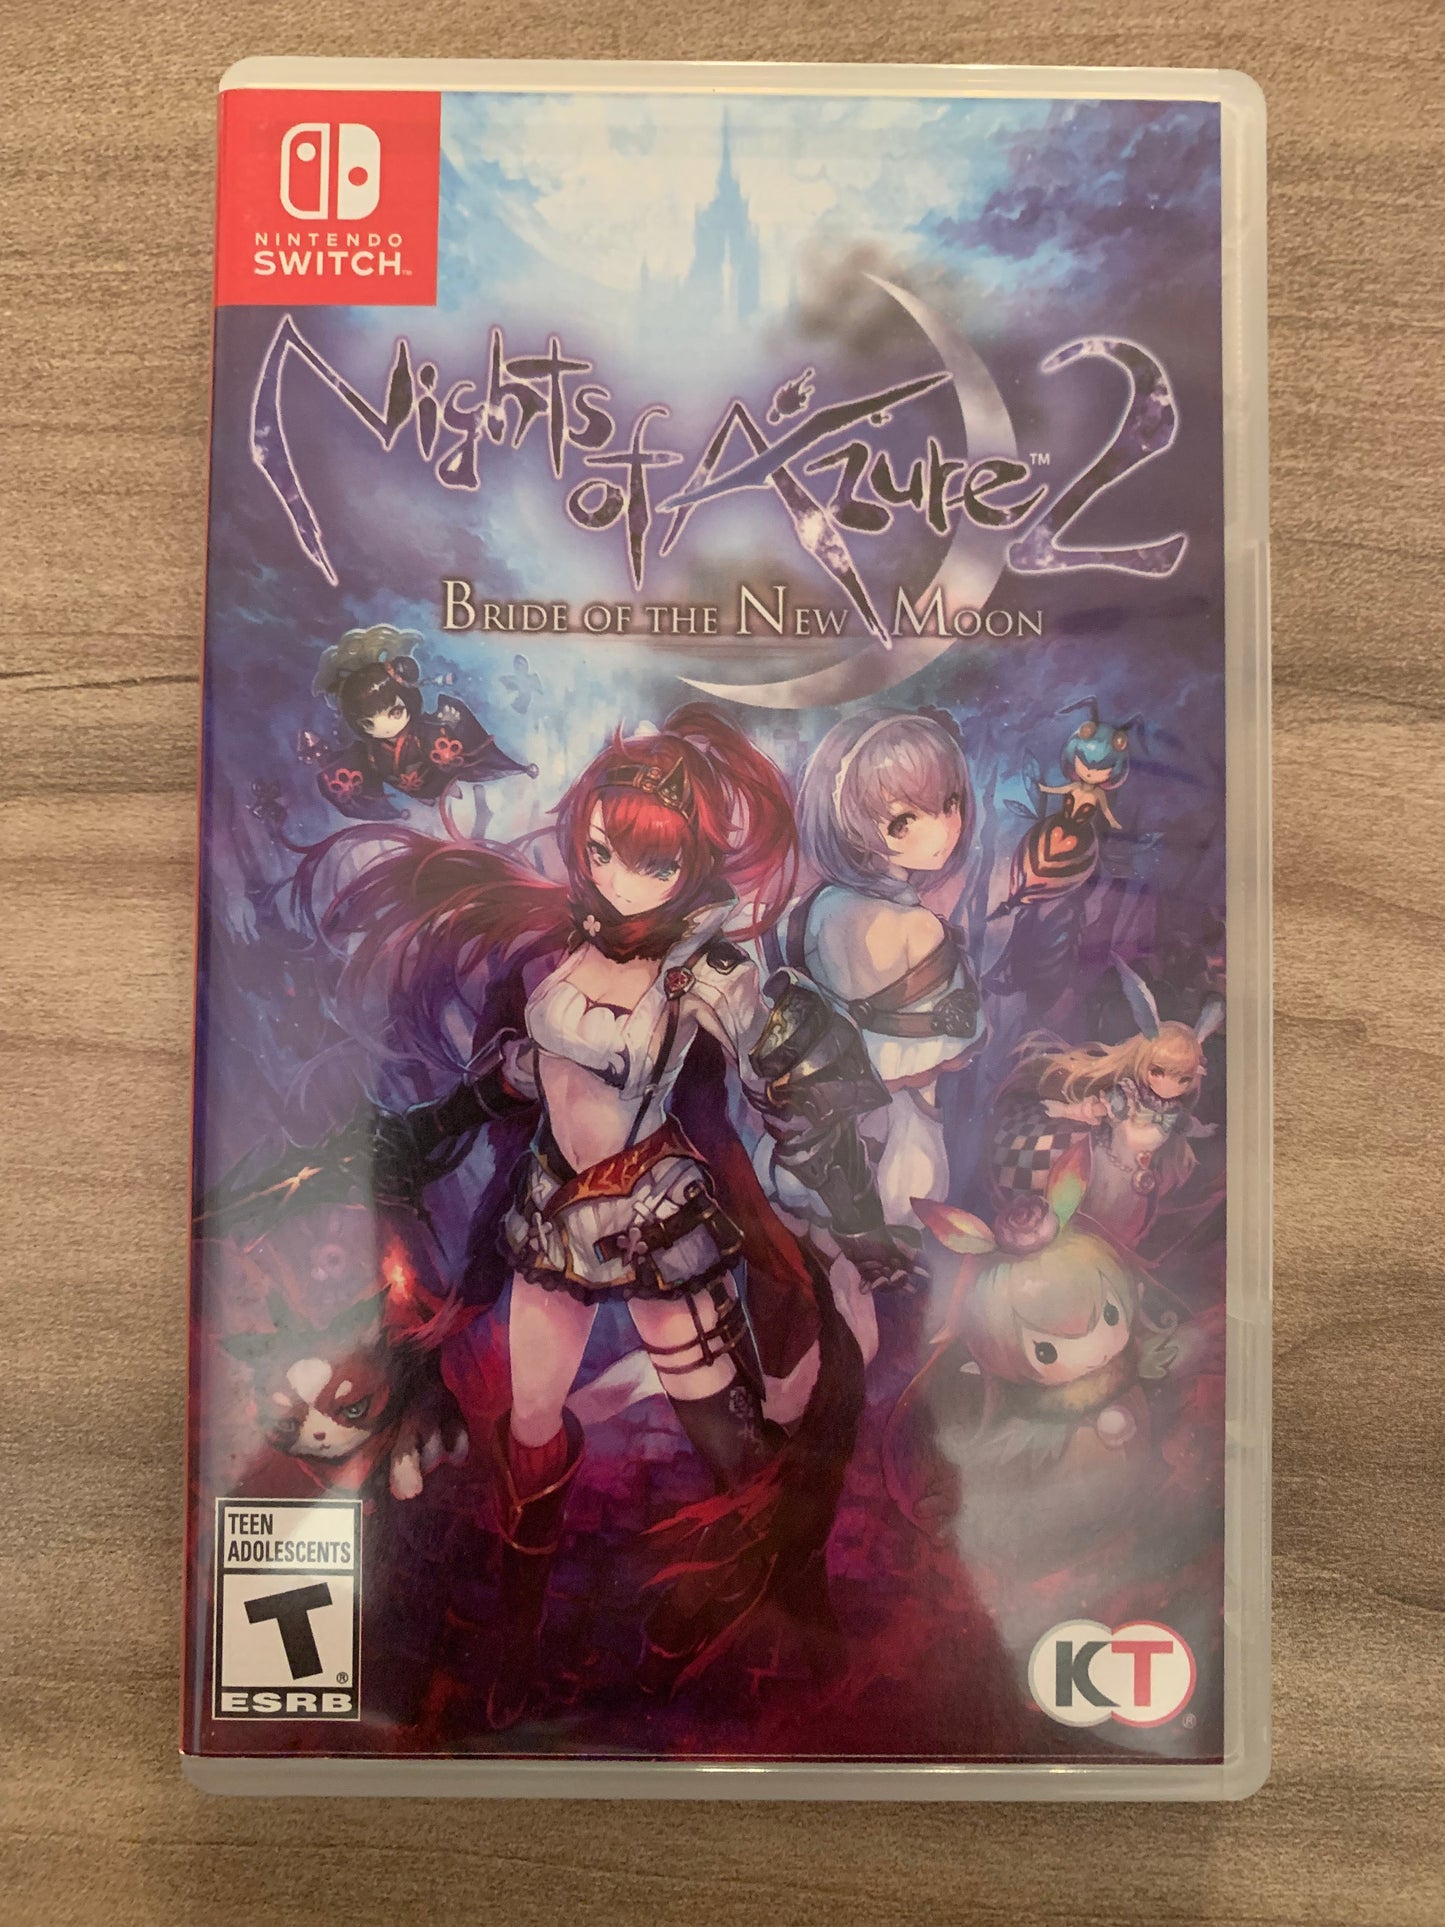 NiNTENDO SWiTCH | NiGHT OF AZURE 2 BRiDE OF THE NEW MOON